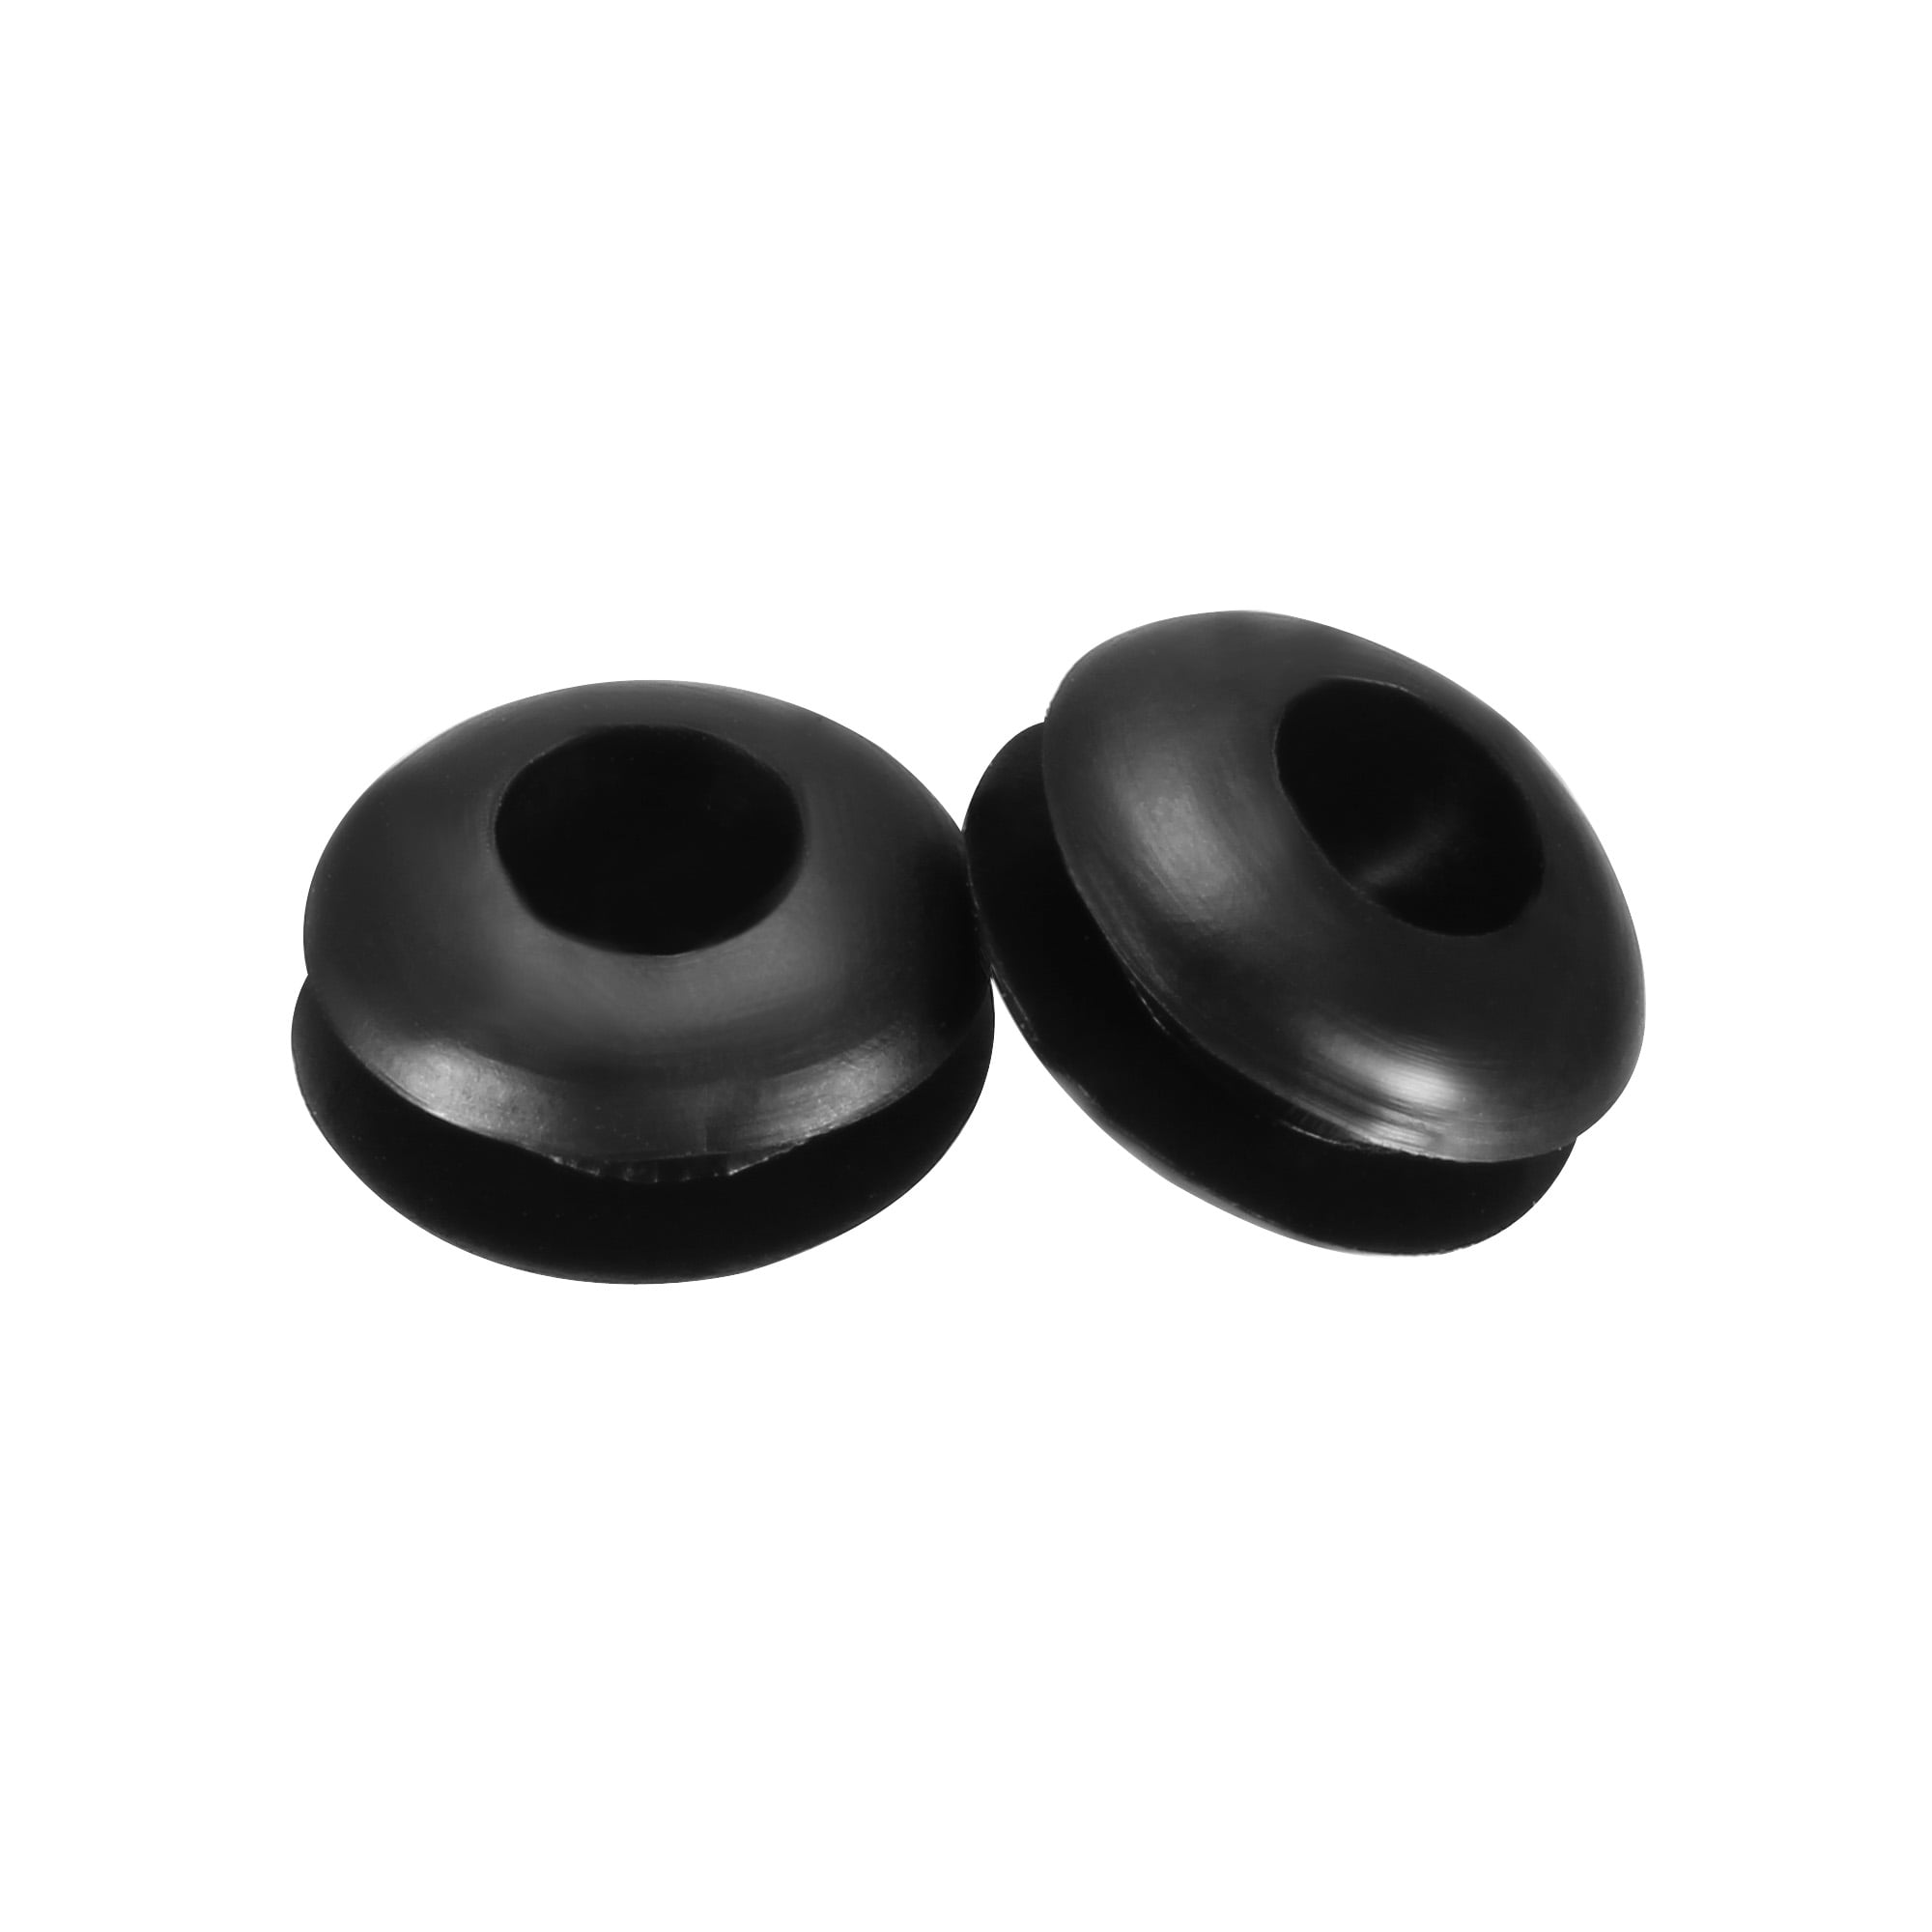 Wire Rubber Grommets Double Sided Cable Open Hole Ring Black 50pcs 